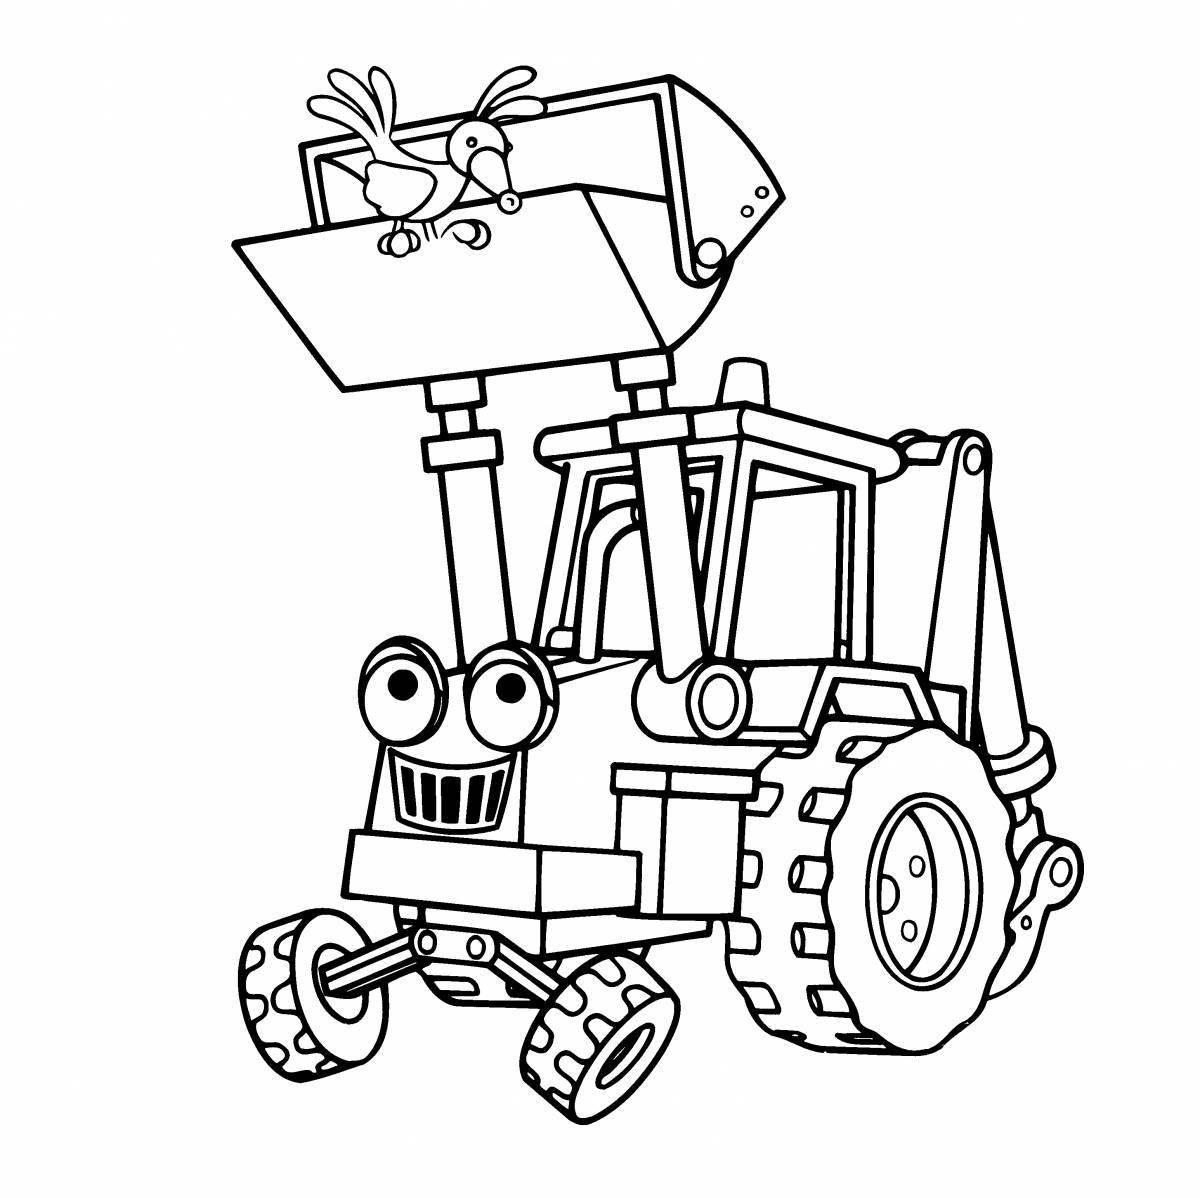 Cute excavator coloring page